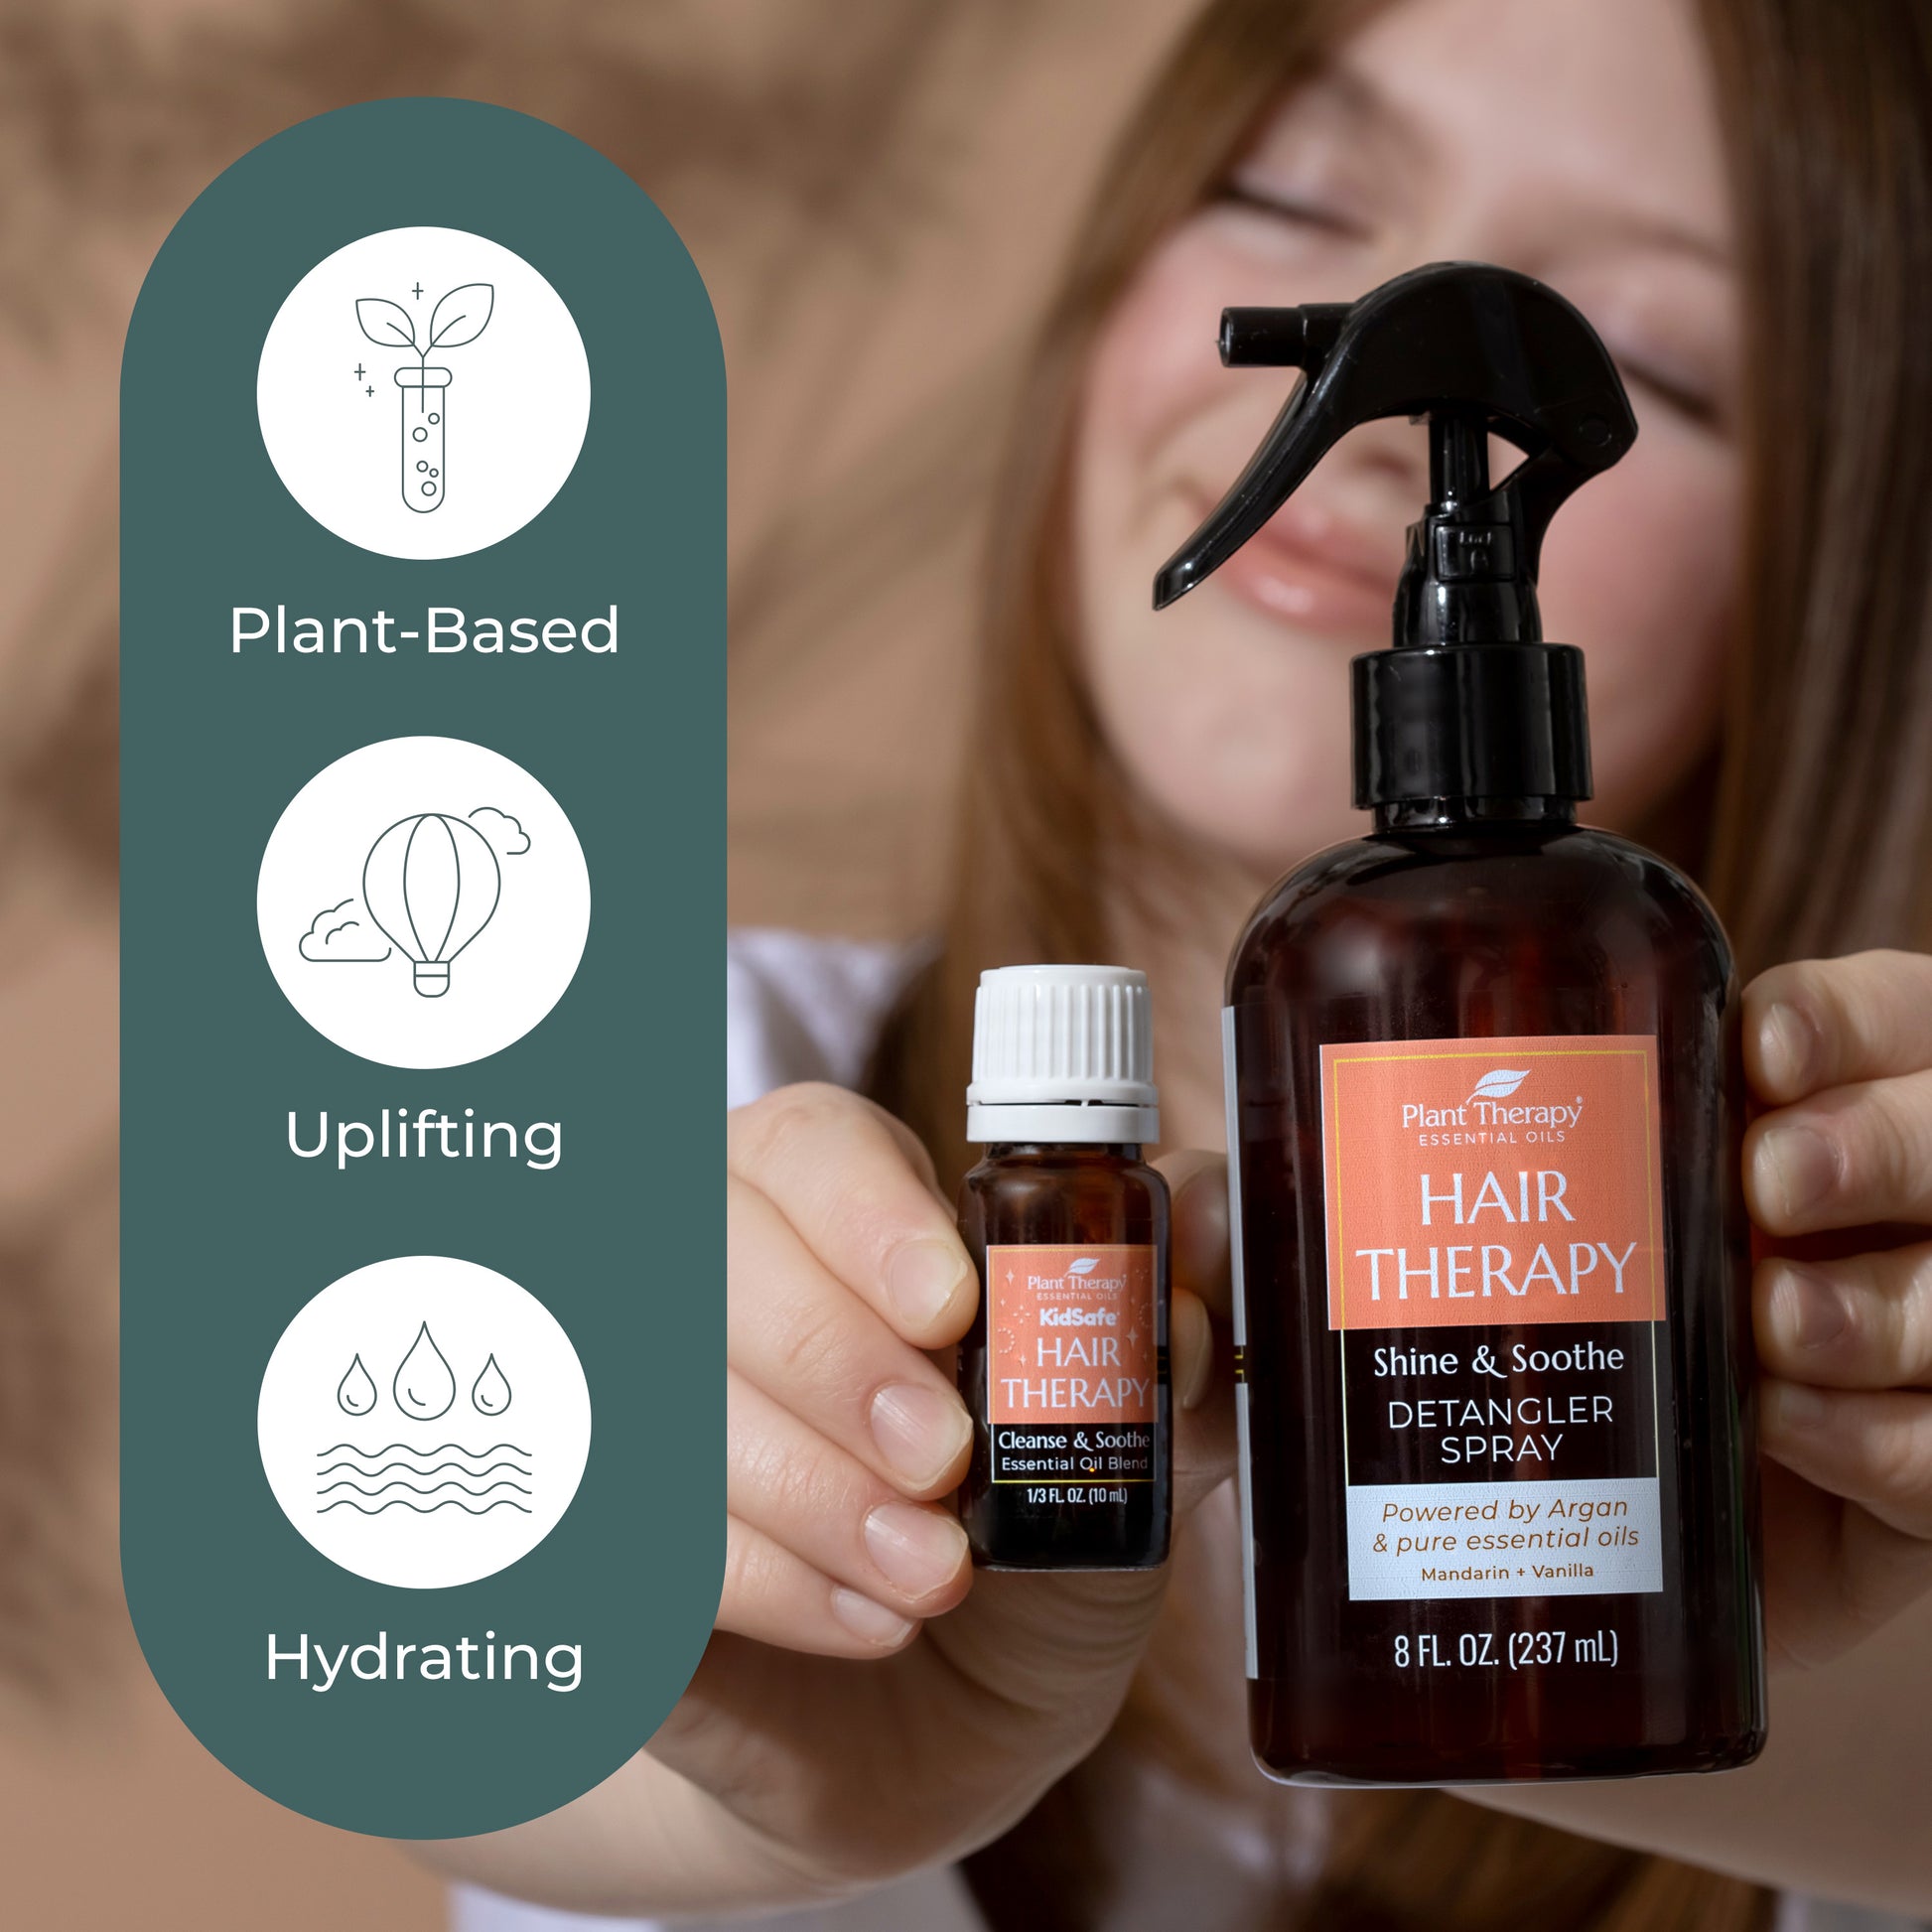 Plant Therapy KidSafe Hair Therapy Cleanse & Soothe Essential Oil Blend 10 ml (1/3 oz) Naturally Cleanse Buildup Soften & Strengthen Hair